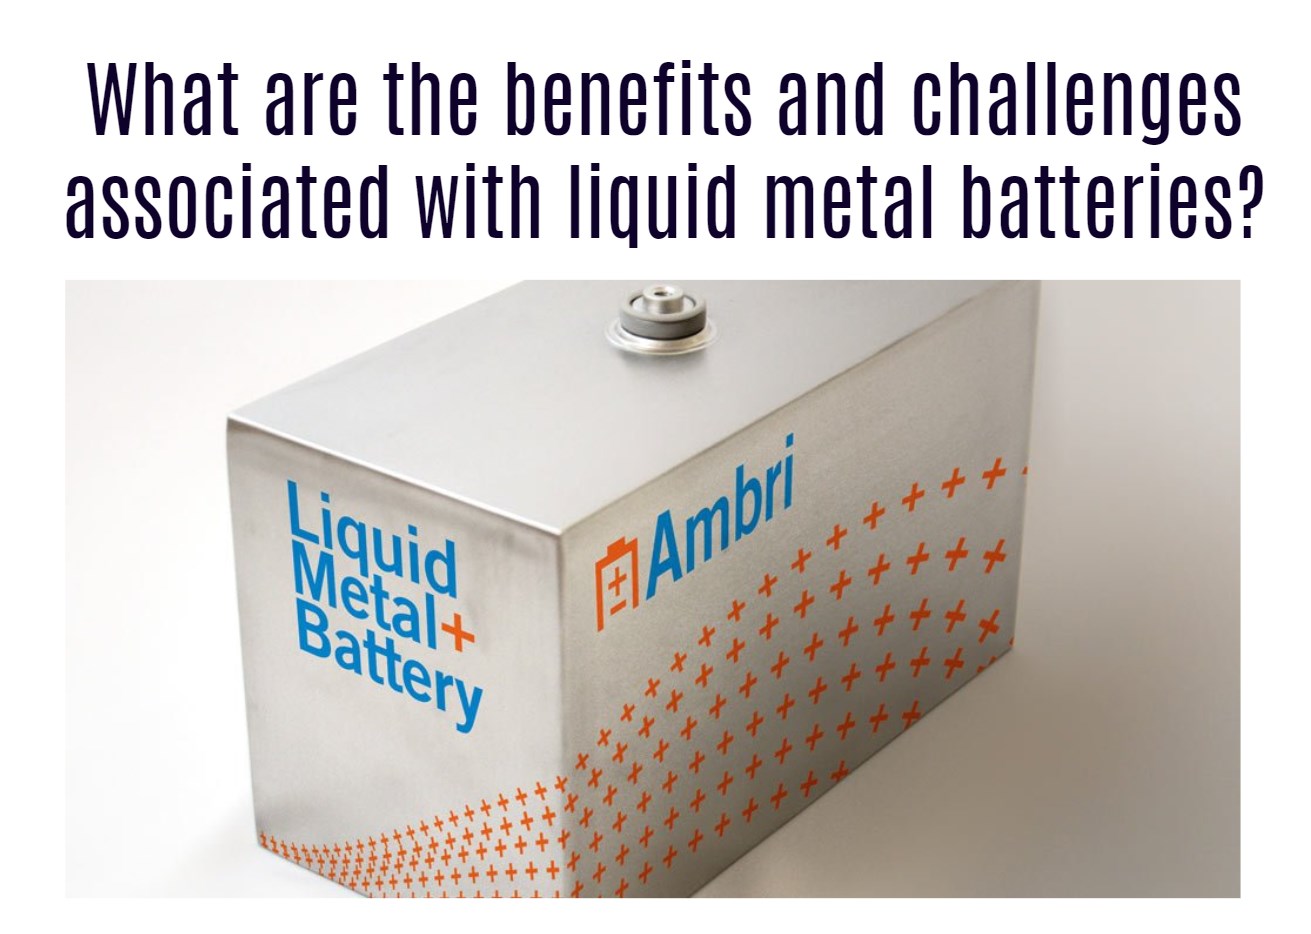 What are the benefits and challenges associated with liquid metal batteries?